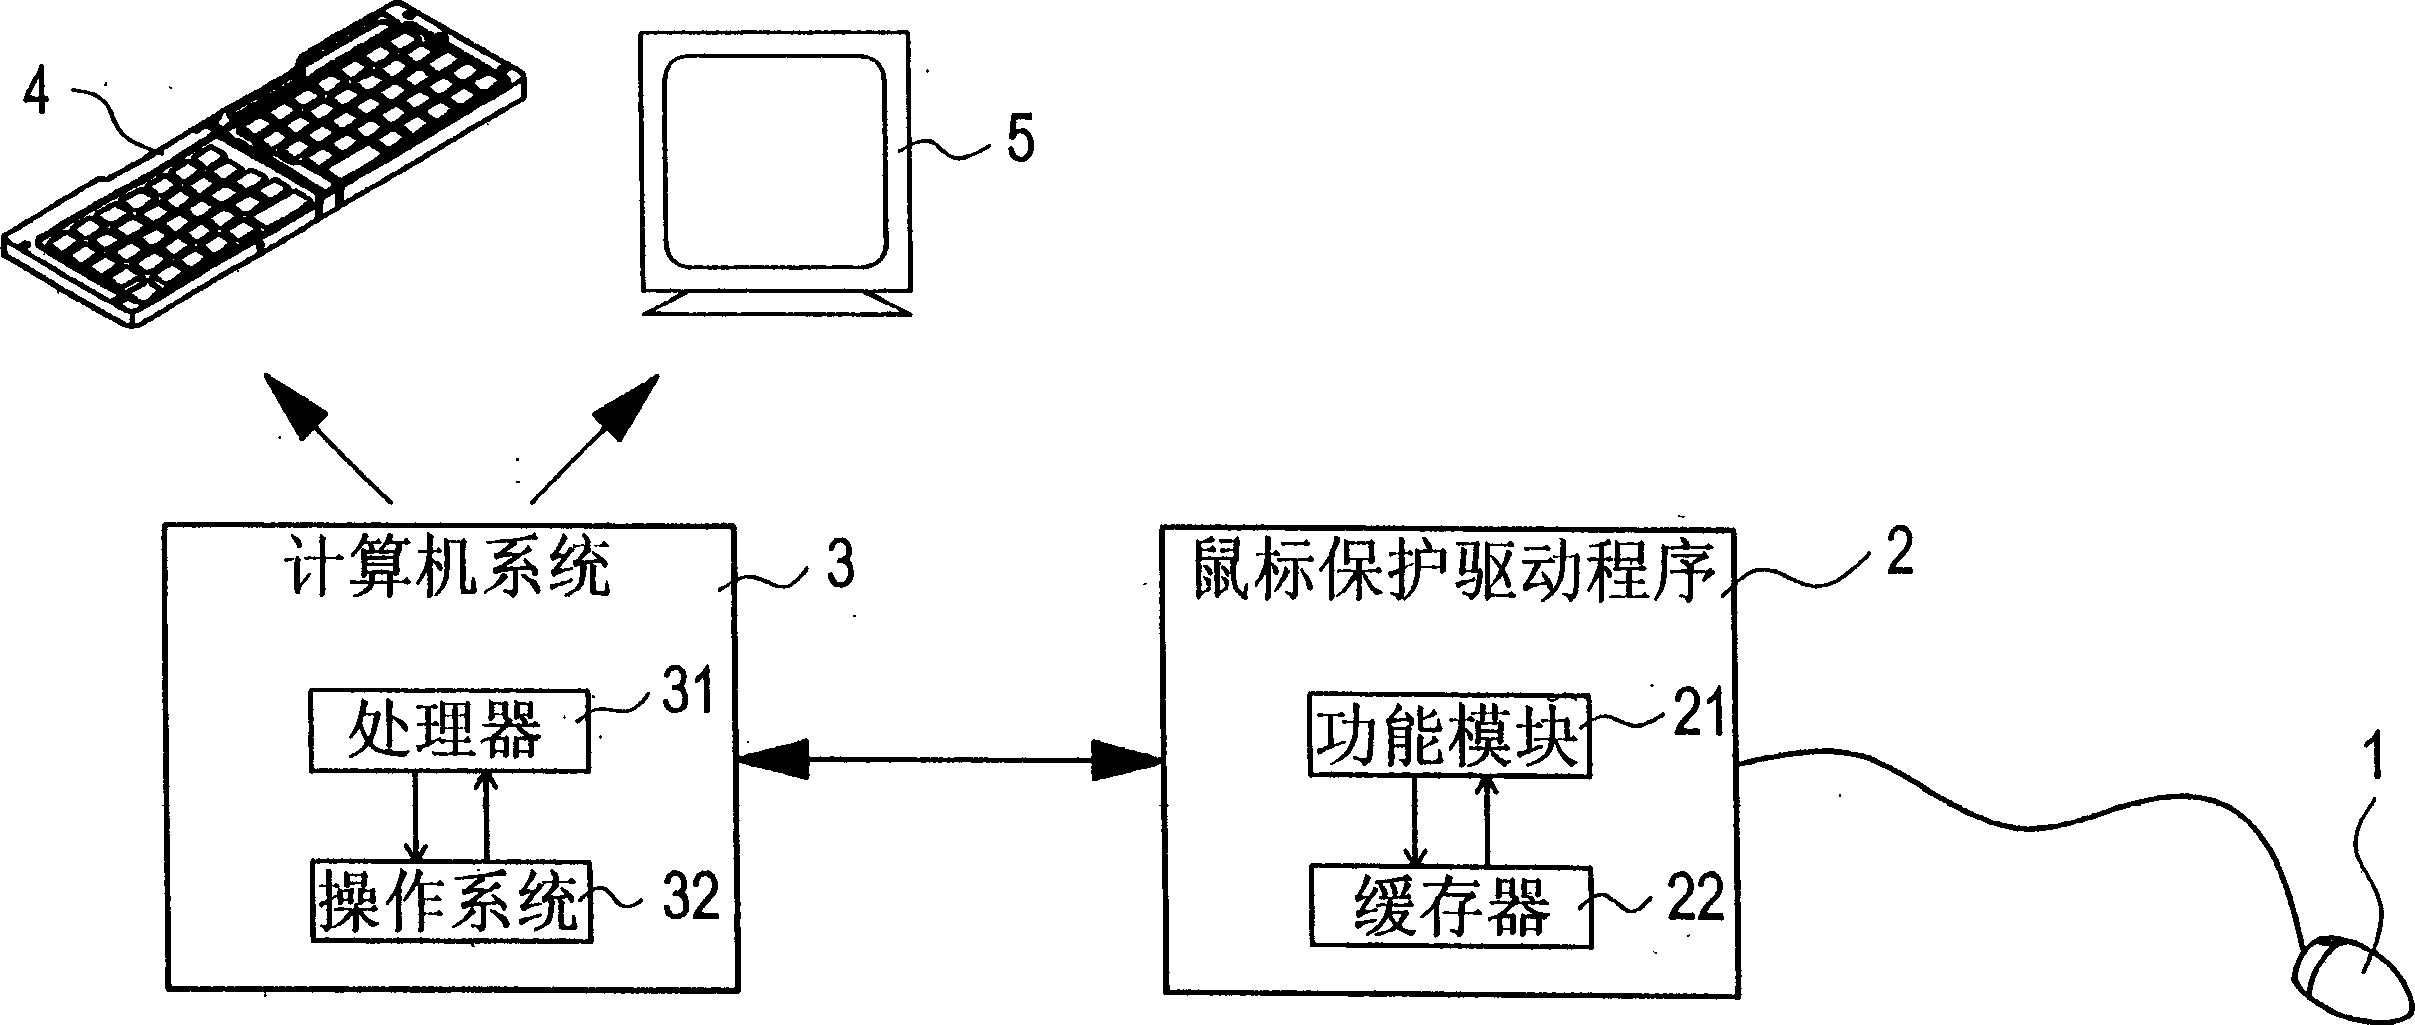 Driving system for achieving information protection by means of a mouse